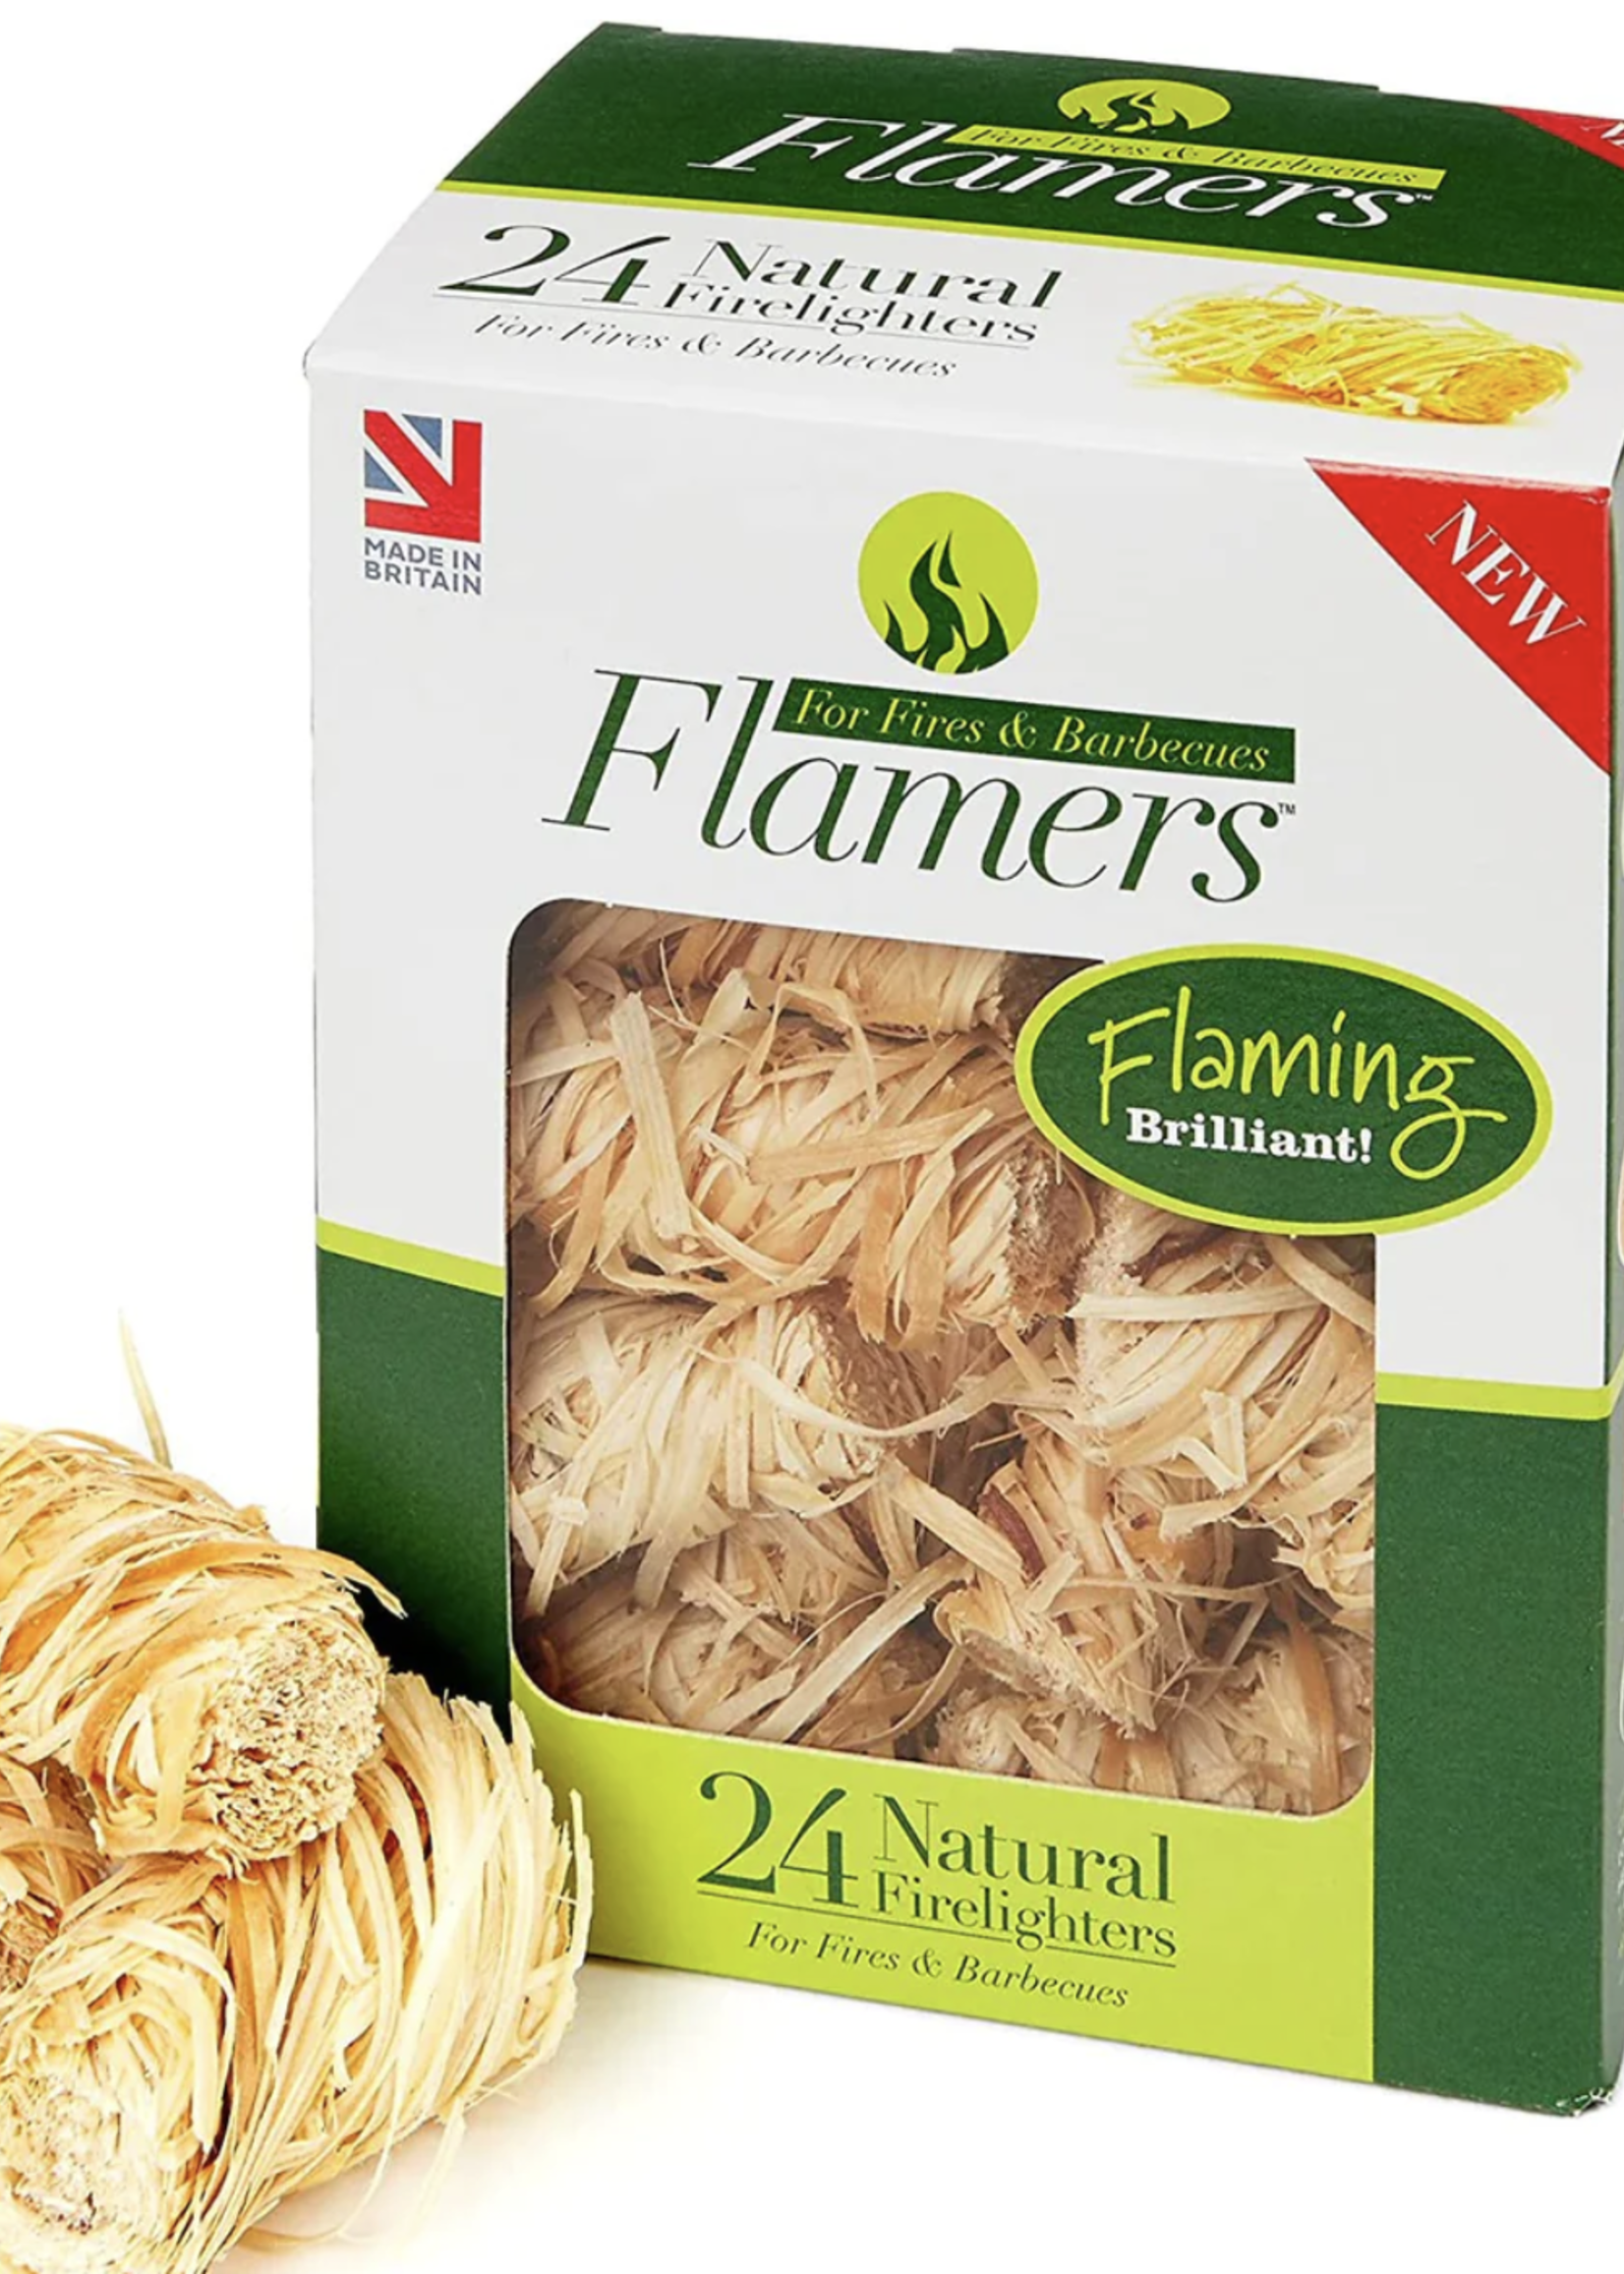 Flamers firelighters 24 pack